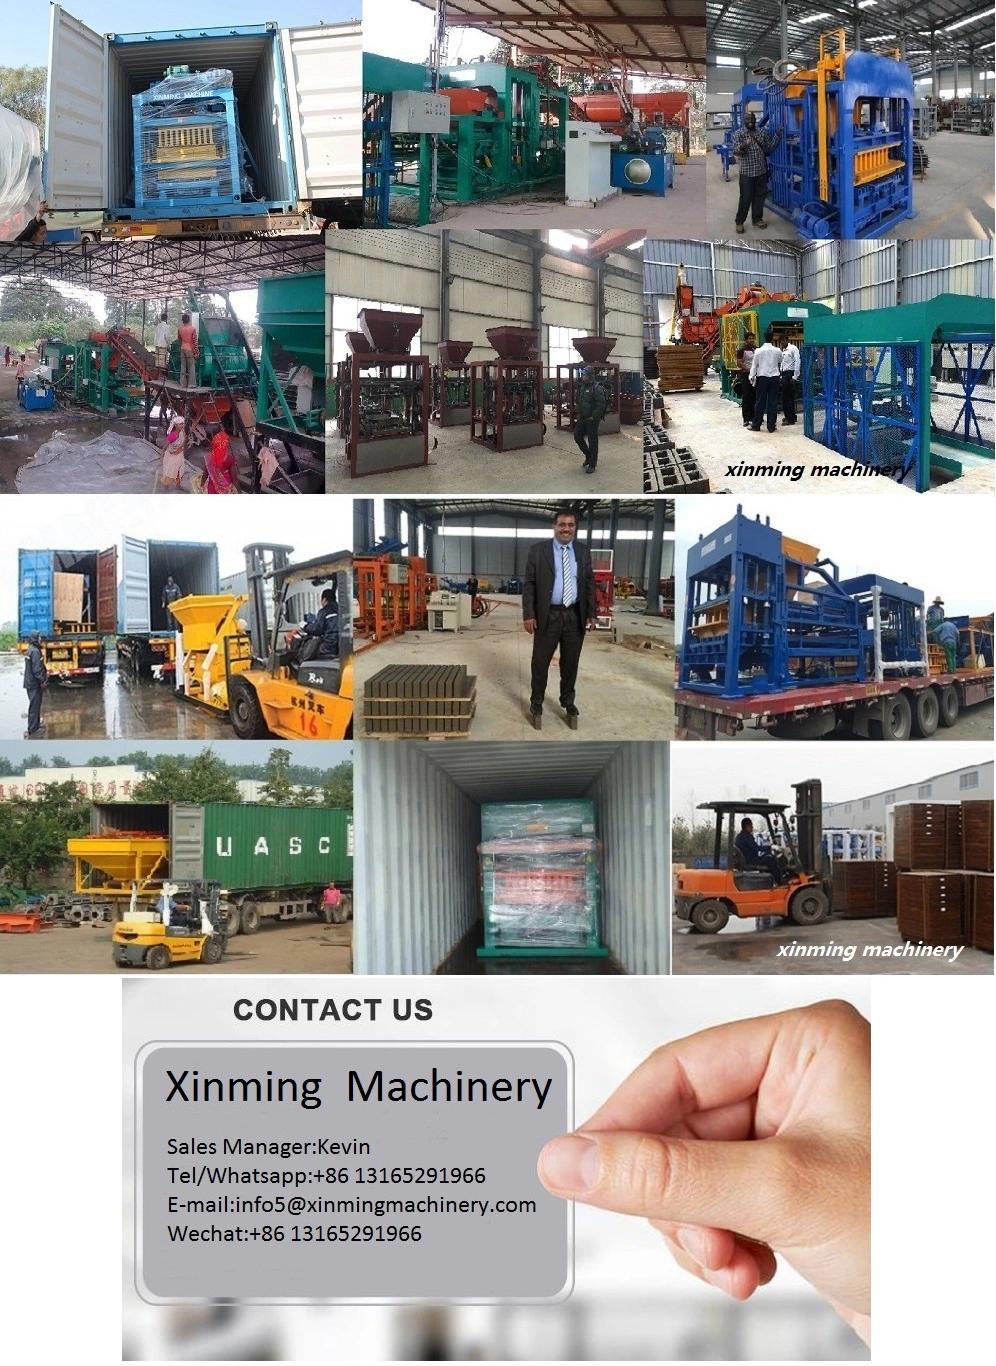 Xm 4-10 Hydraulic Clay Brick Production Line with Factory Price